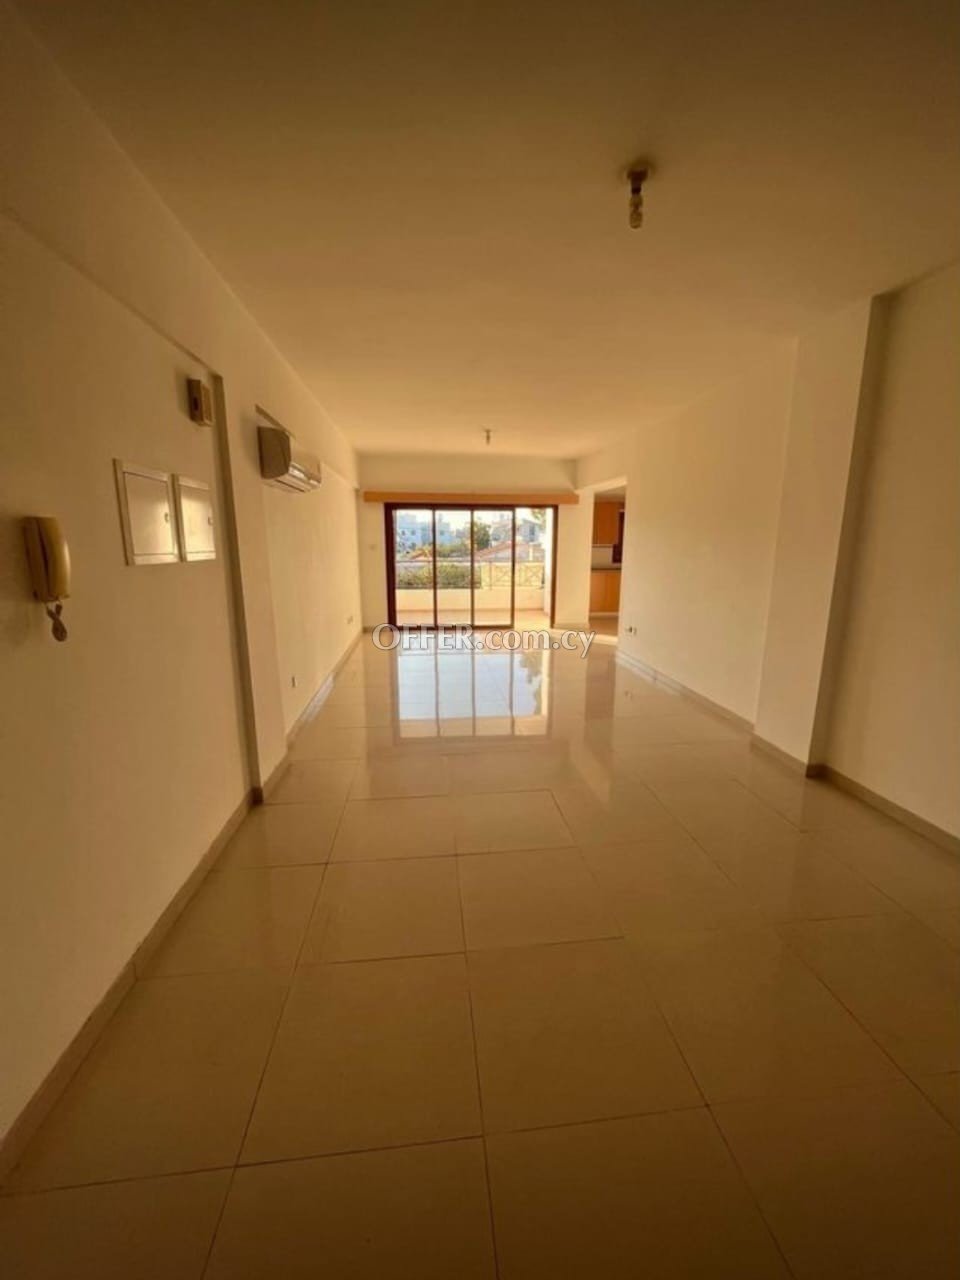 3-bedroom Apartment 90 sqm in Strovolos - 3